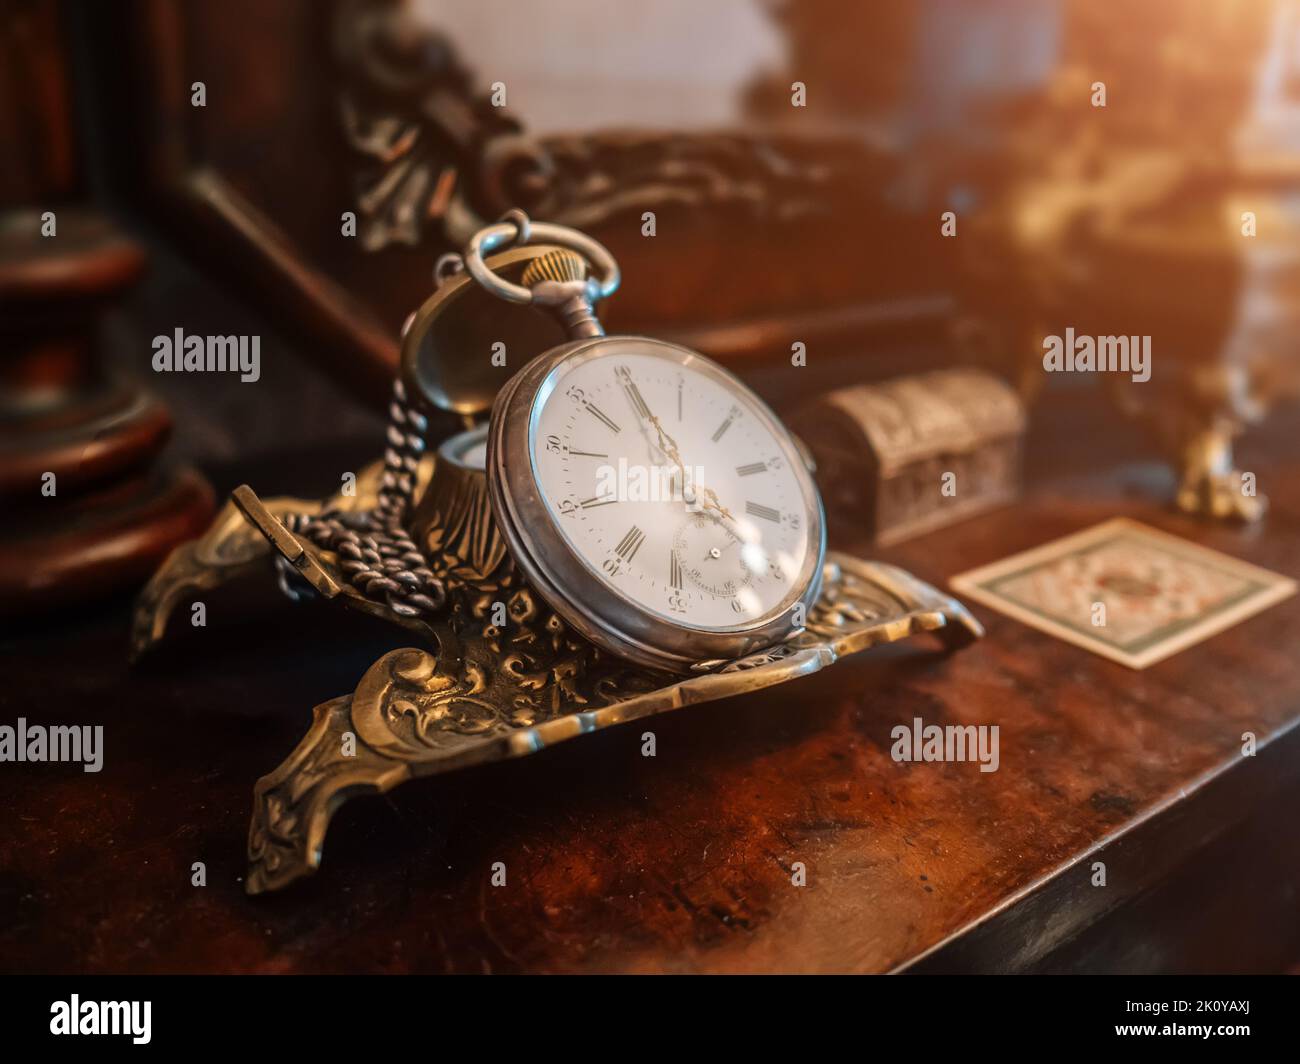 Ancient vintage antique pocket watch or clock close up. Stock Photo